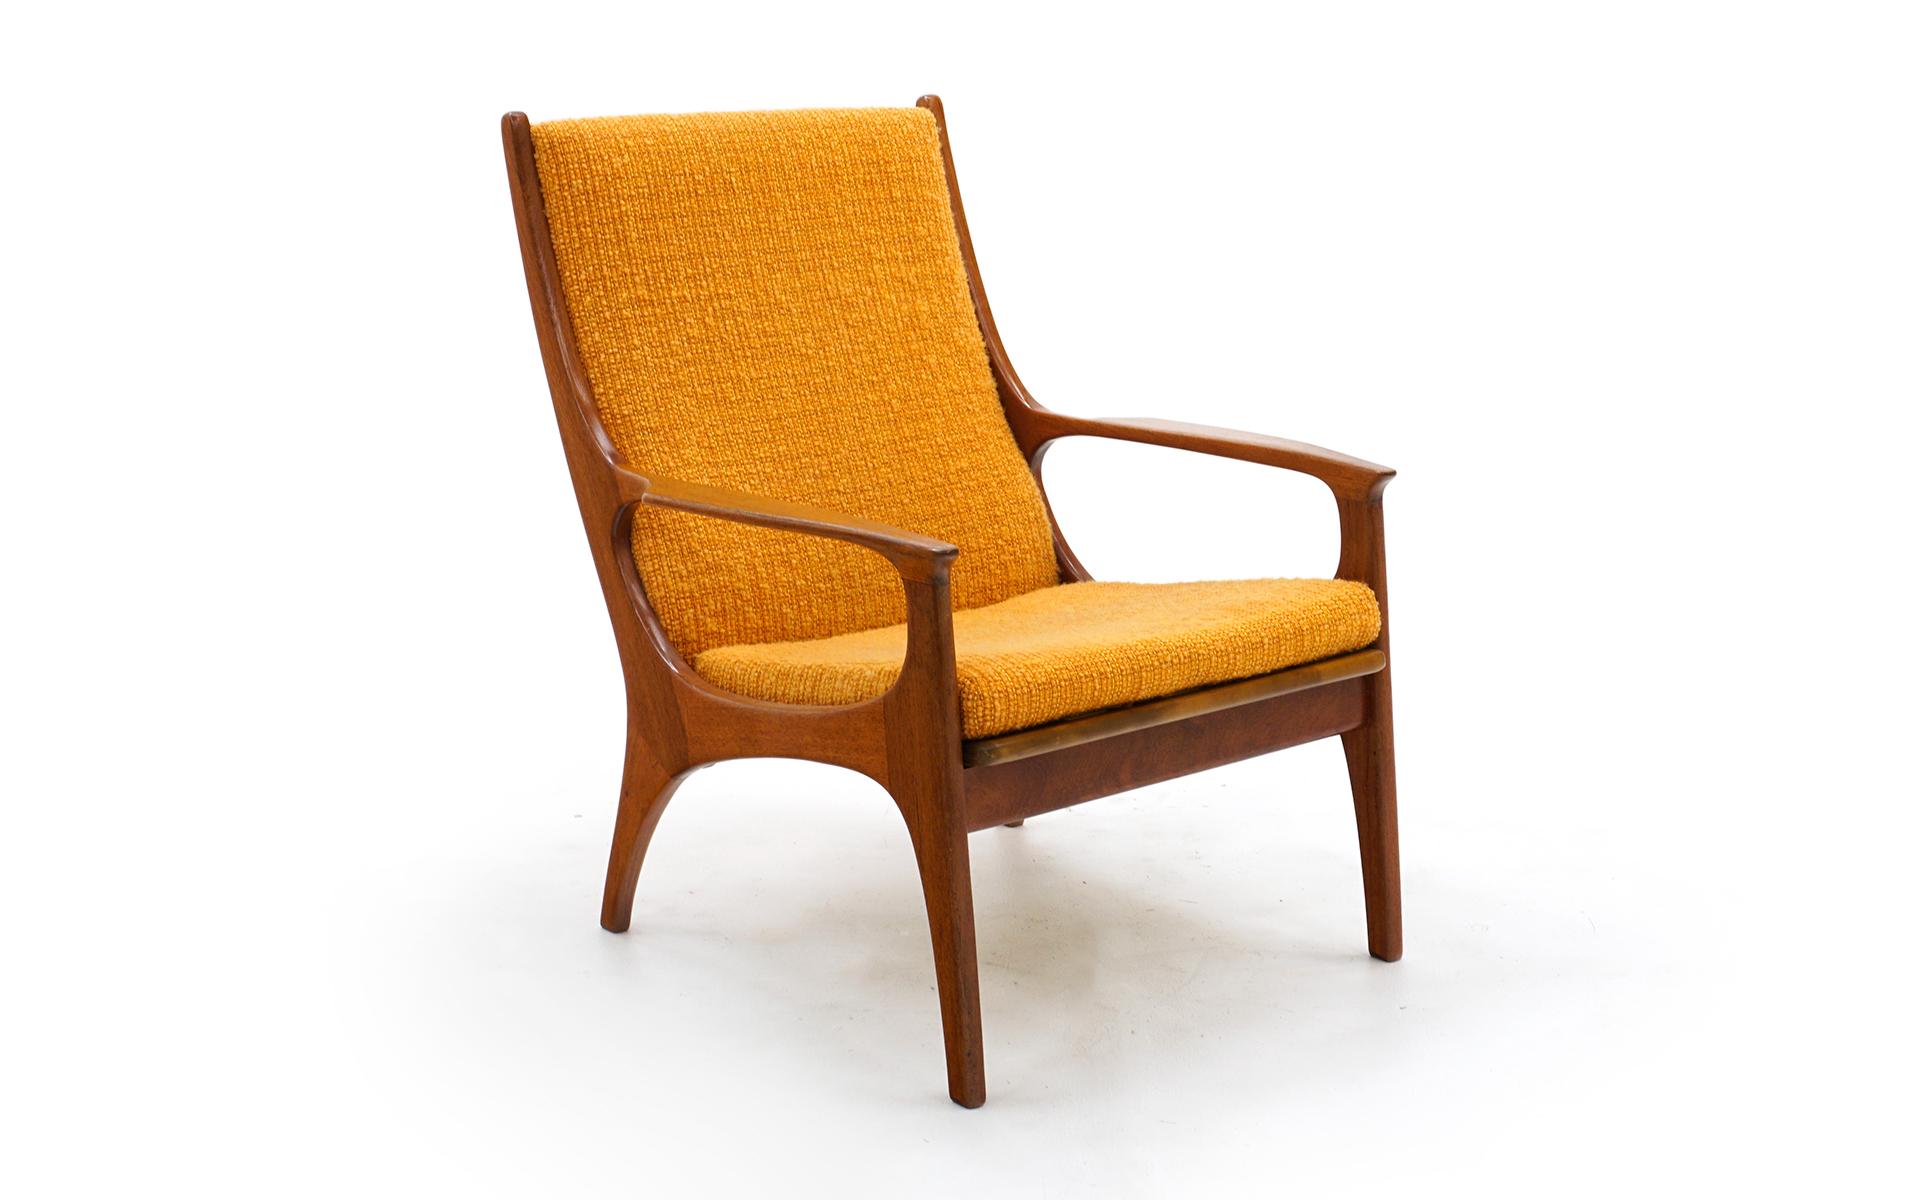 Complimentary pair of teak Danish lounge chairs. One rocking chair and one stationary. Both are very comfortable. Completely original and in very good condition. Extremely well made these are a great buy!

Armchair Dimensions
34.25 in H x 26 in D